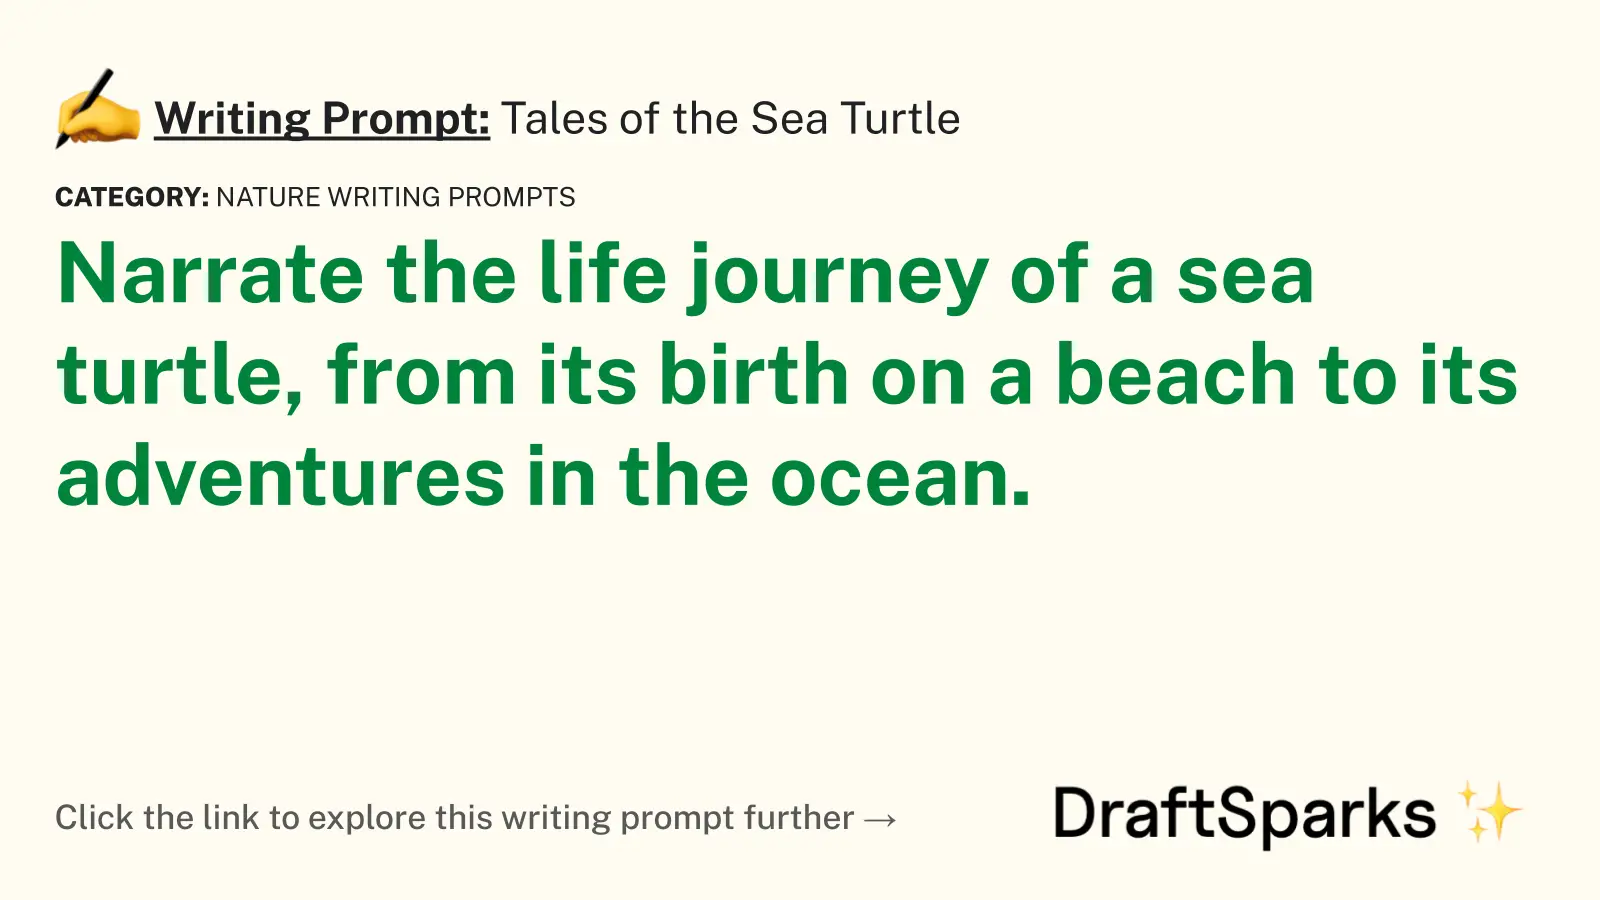 Tales of the Sea Turtle